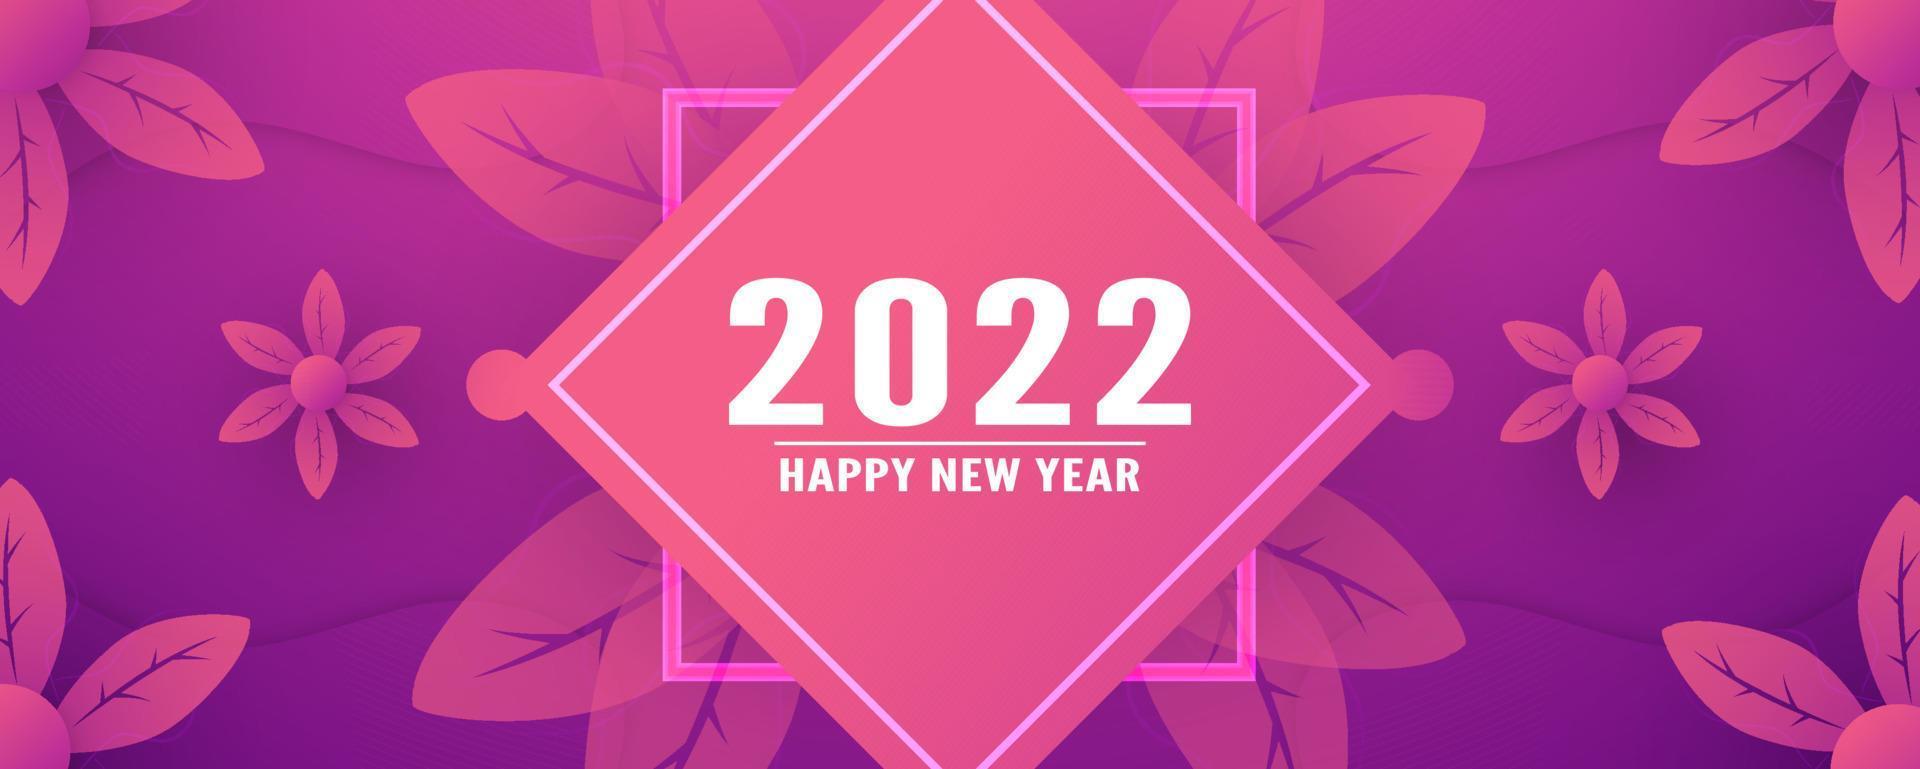 Happy new year 2022. Template design with new trend of gradient. Vector illustration for cover, discount promotion, advertisement.